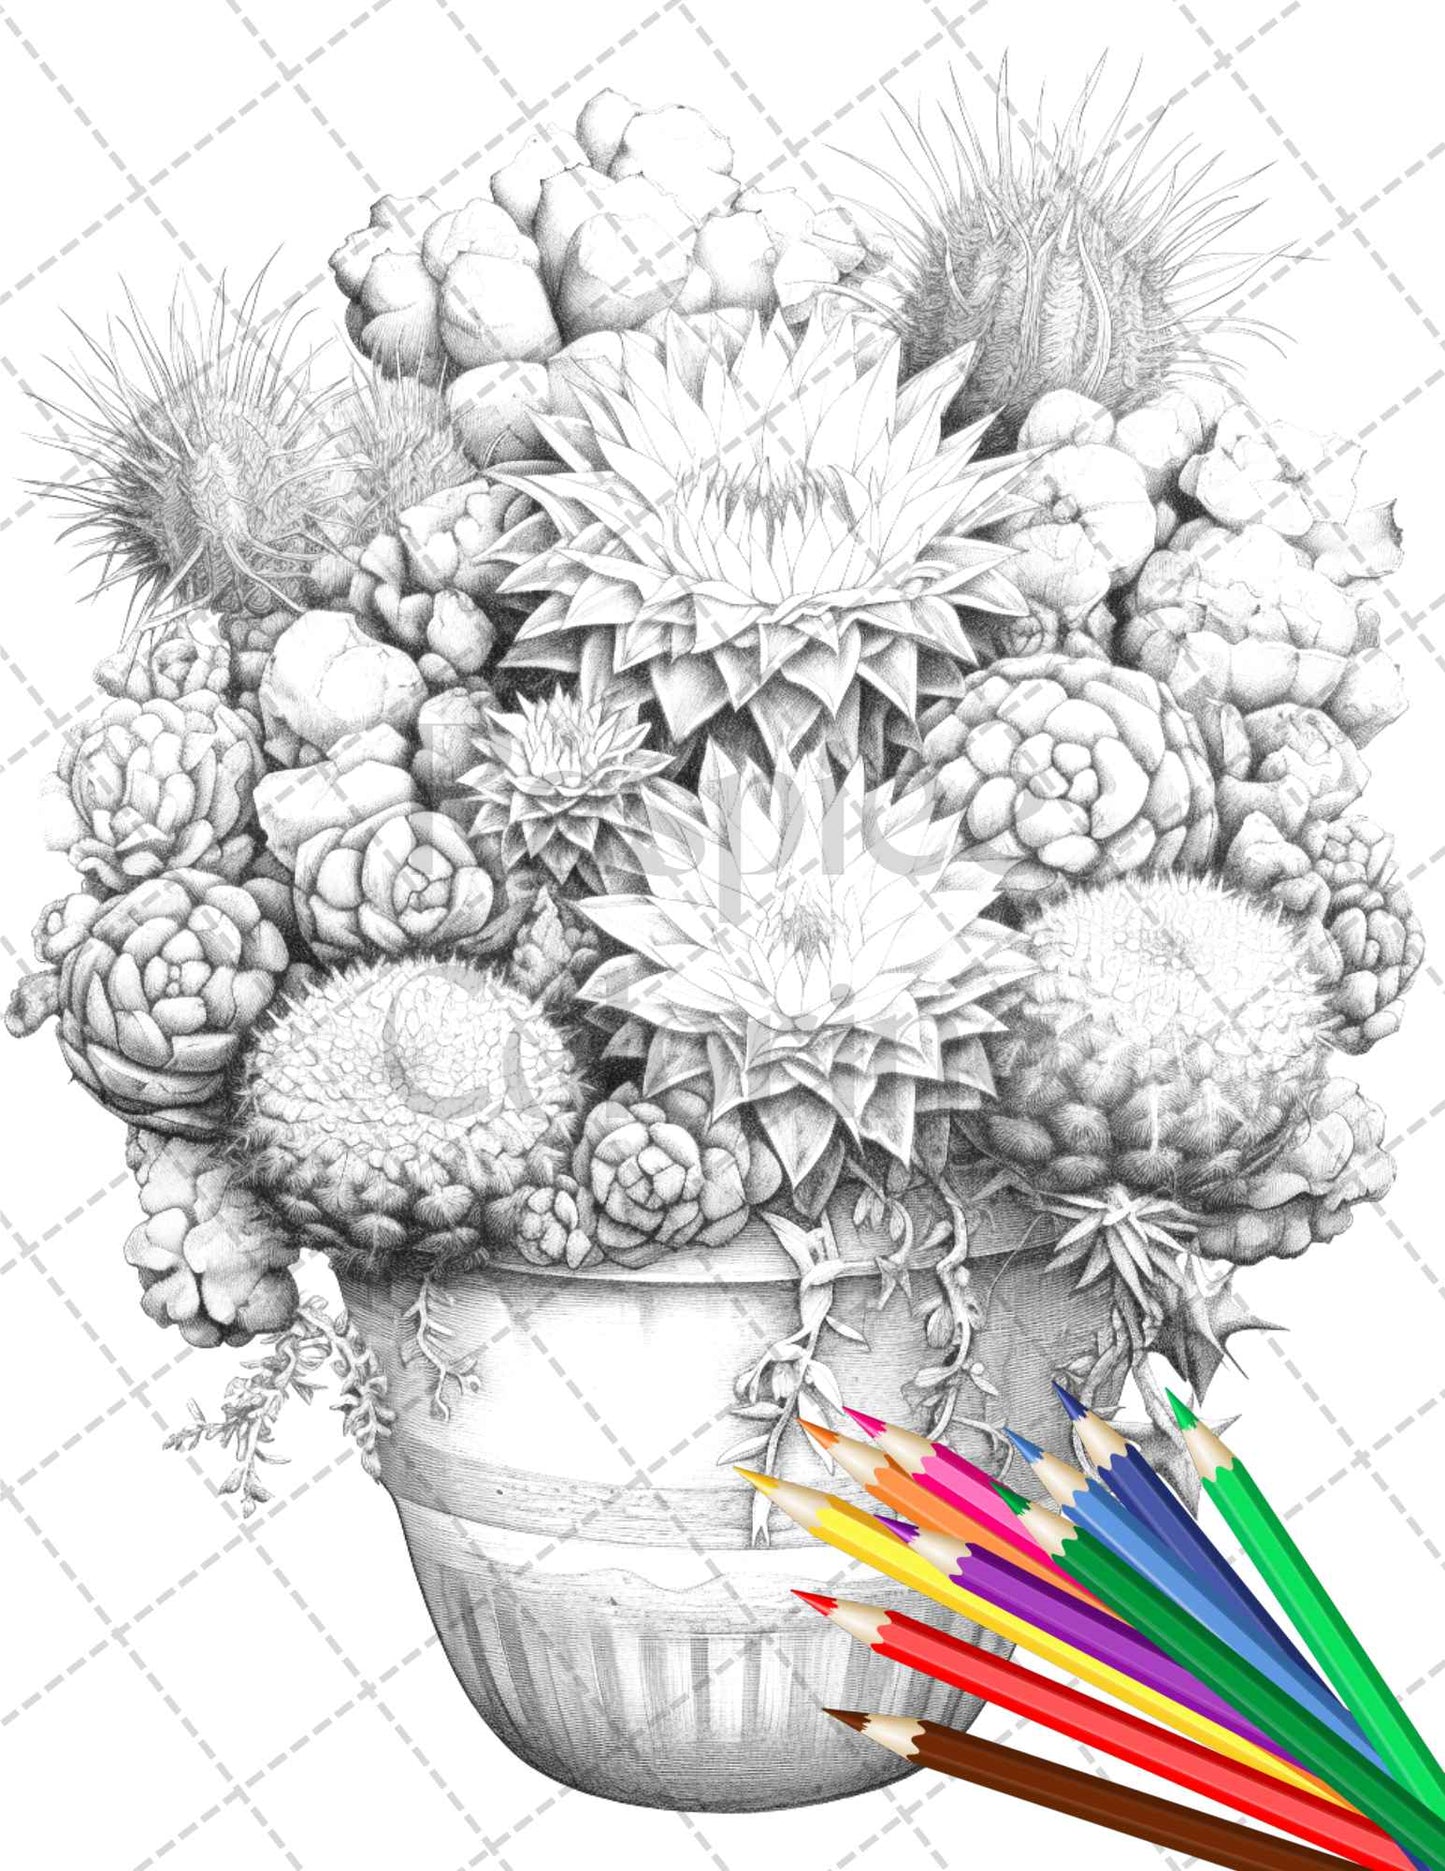 40 Charming Cactus Pots Grayscale Coloring Pages Printable for Adults, PDF File Instant Download - raspiee